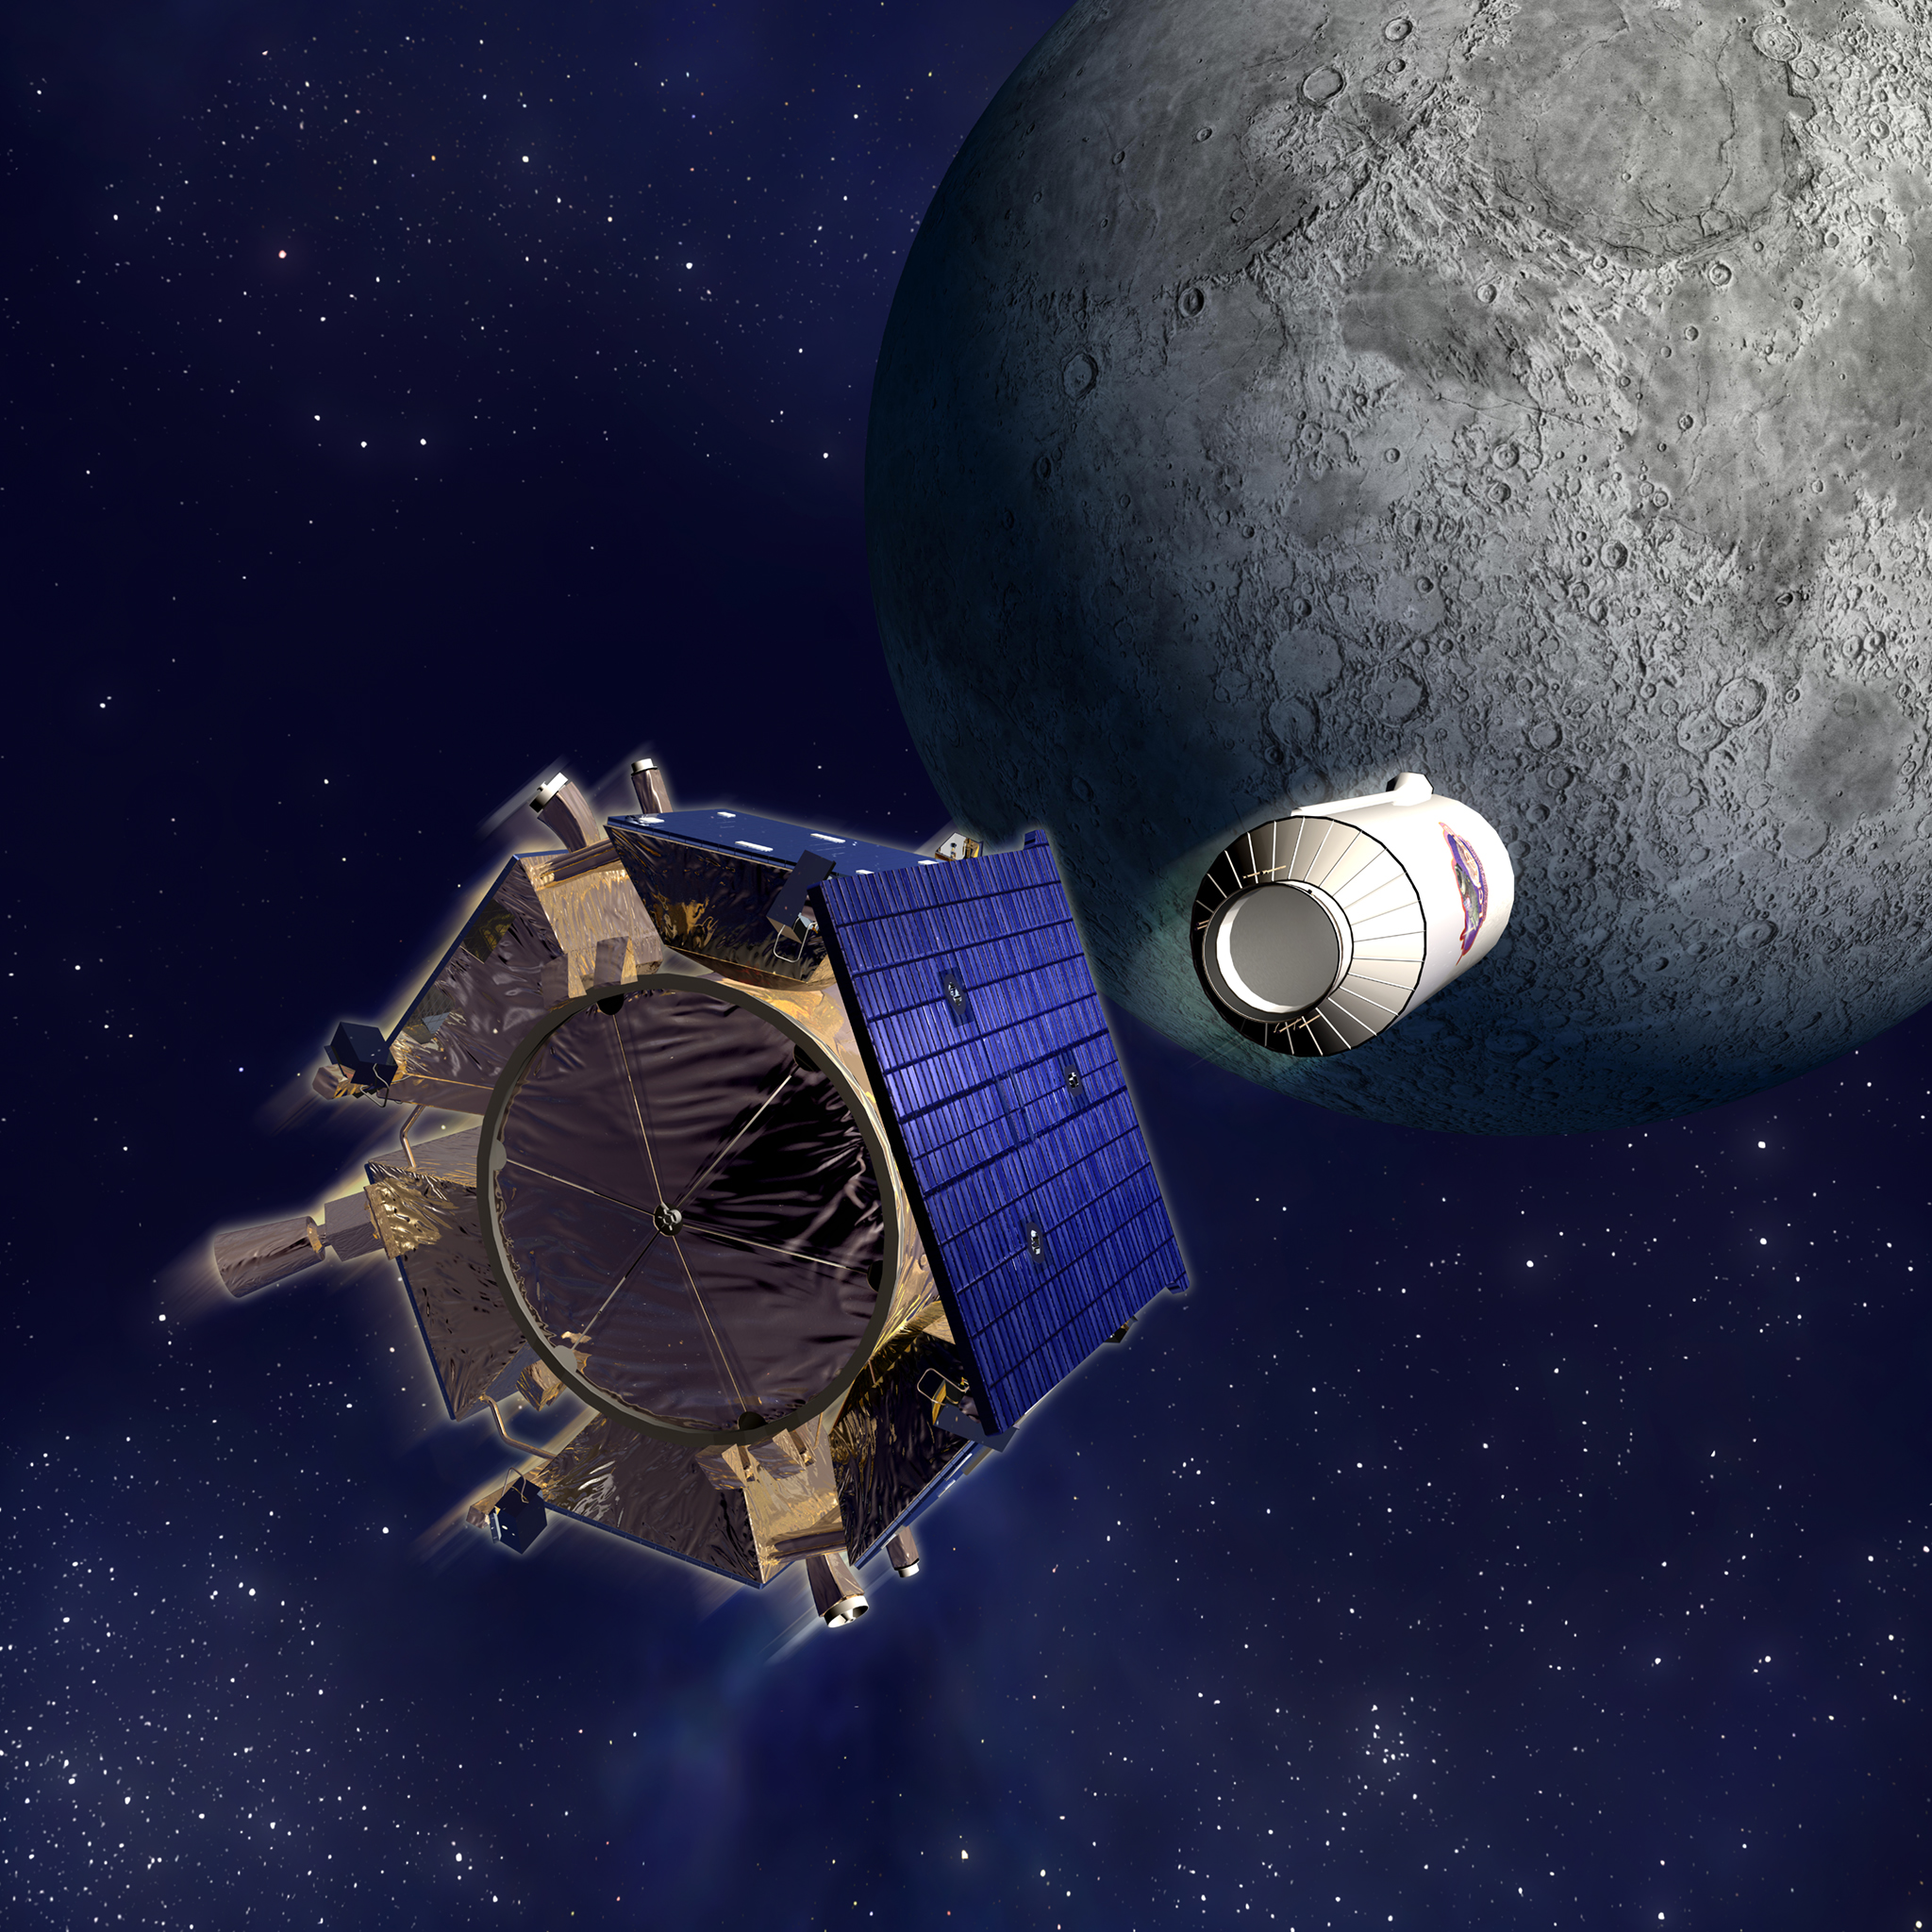 Illustration of the Lunar Crater Observation and Sensing Satellite’s Shepherding Satellite at left and Centaur upper stage at right prior to lunar impact